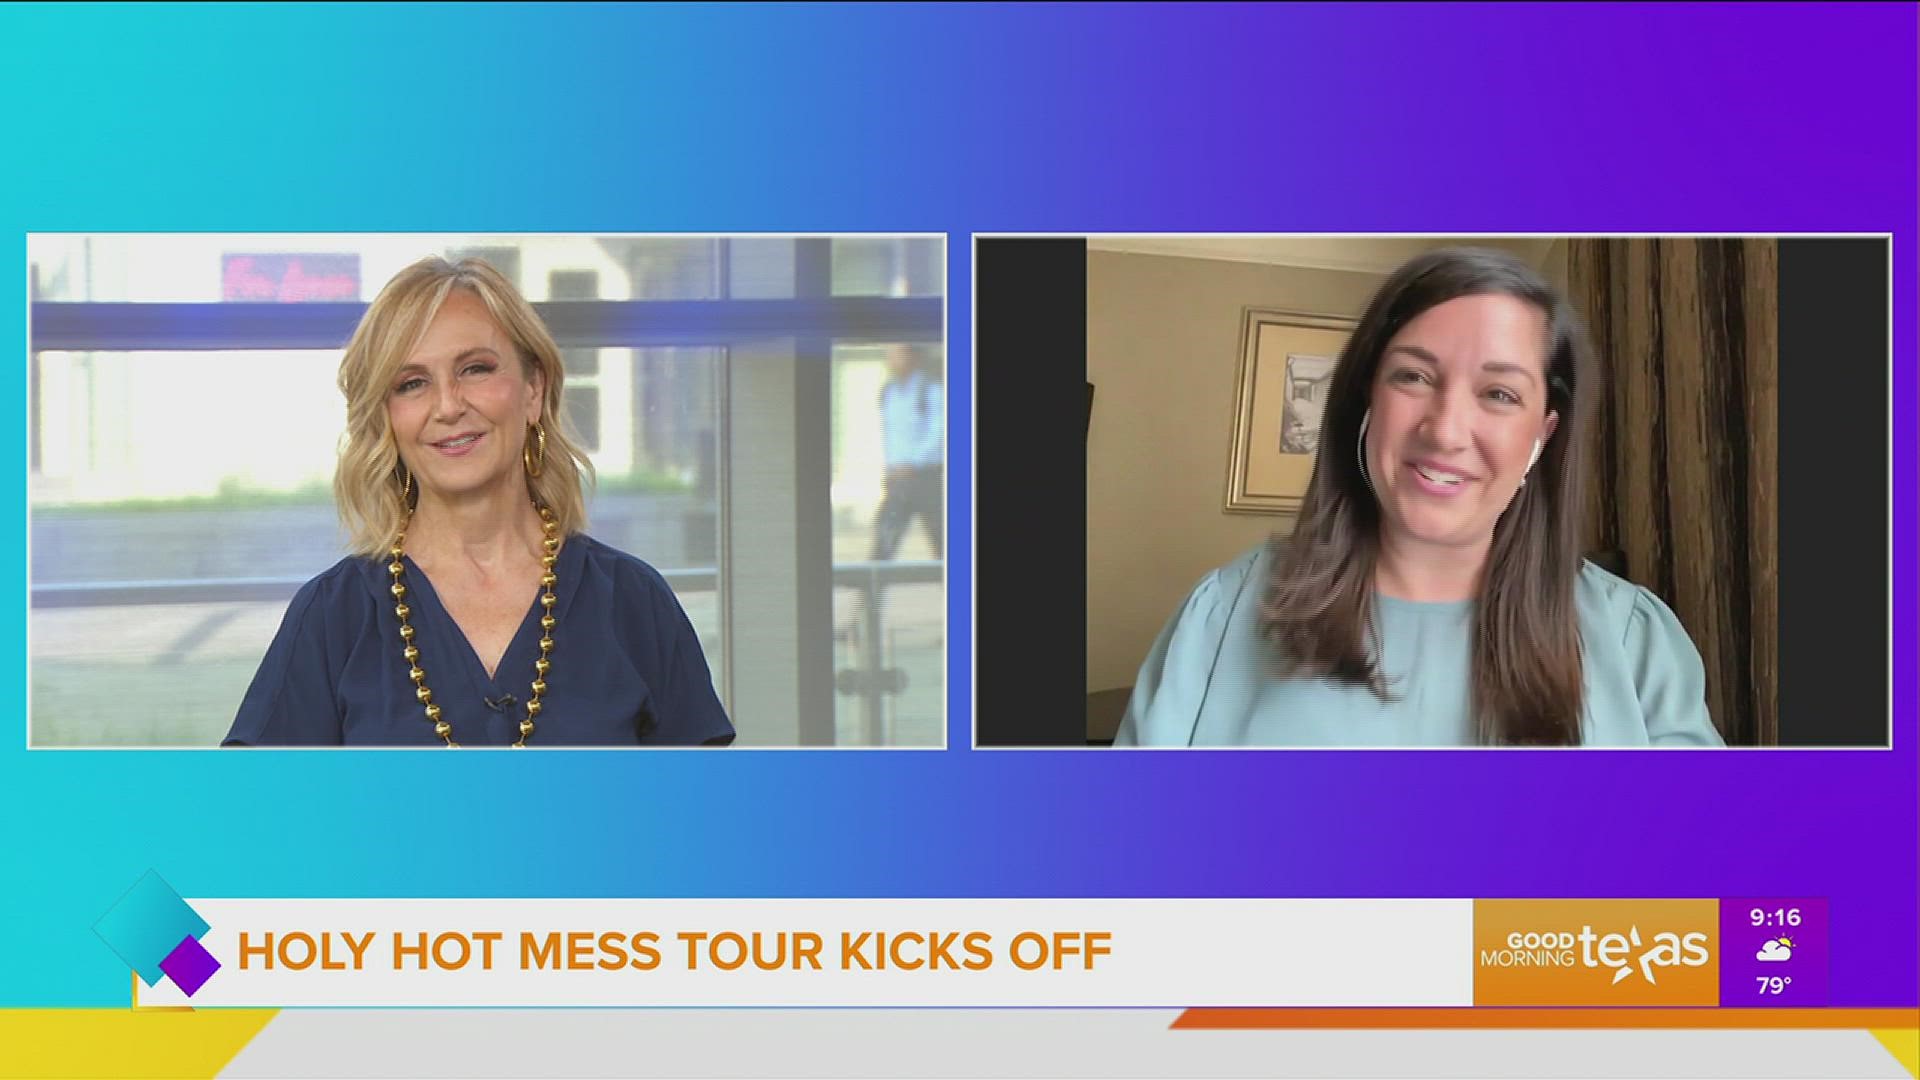 Viral sensation Mary Katherine Backstrom joins us with her new book, “Holy Hot Mess” and explains why she chose Dallas to kick off her Holy Hot Mess Tour